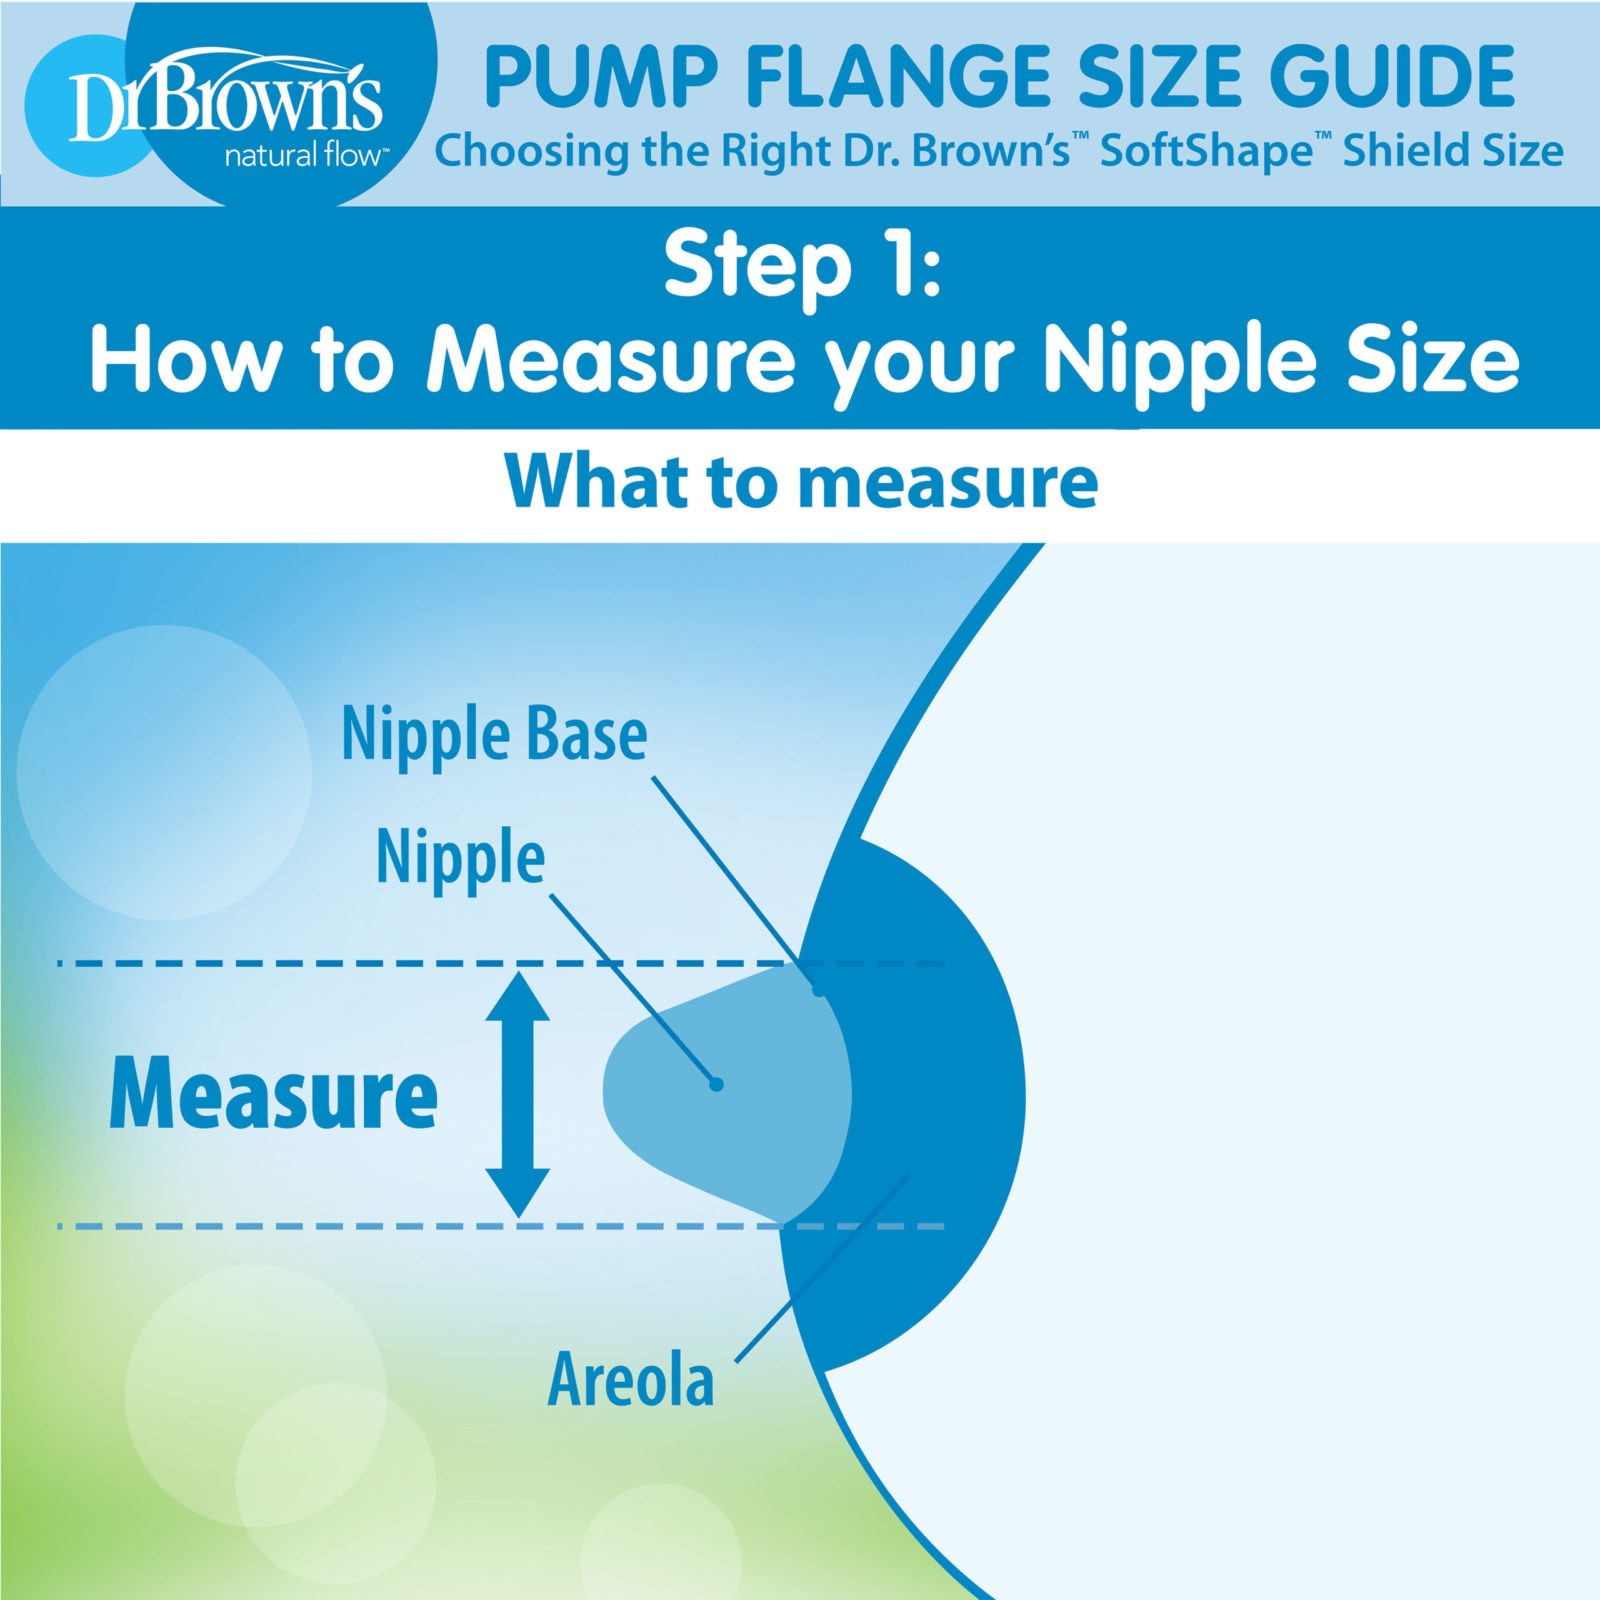 Choosing the right breast pump is an important step in your